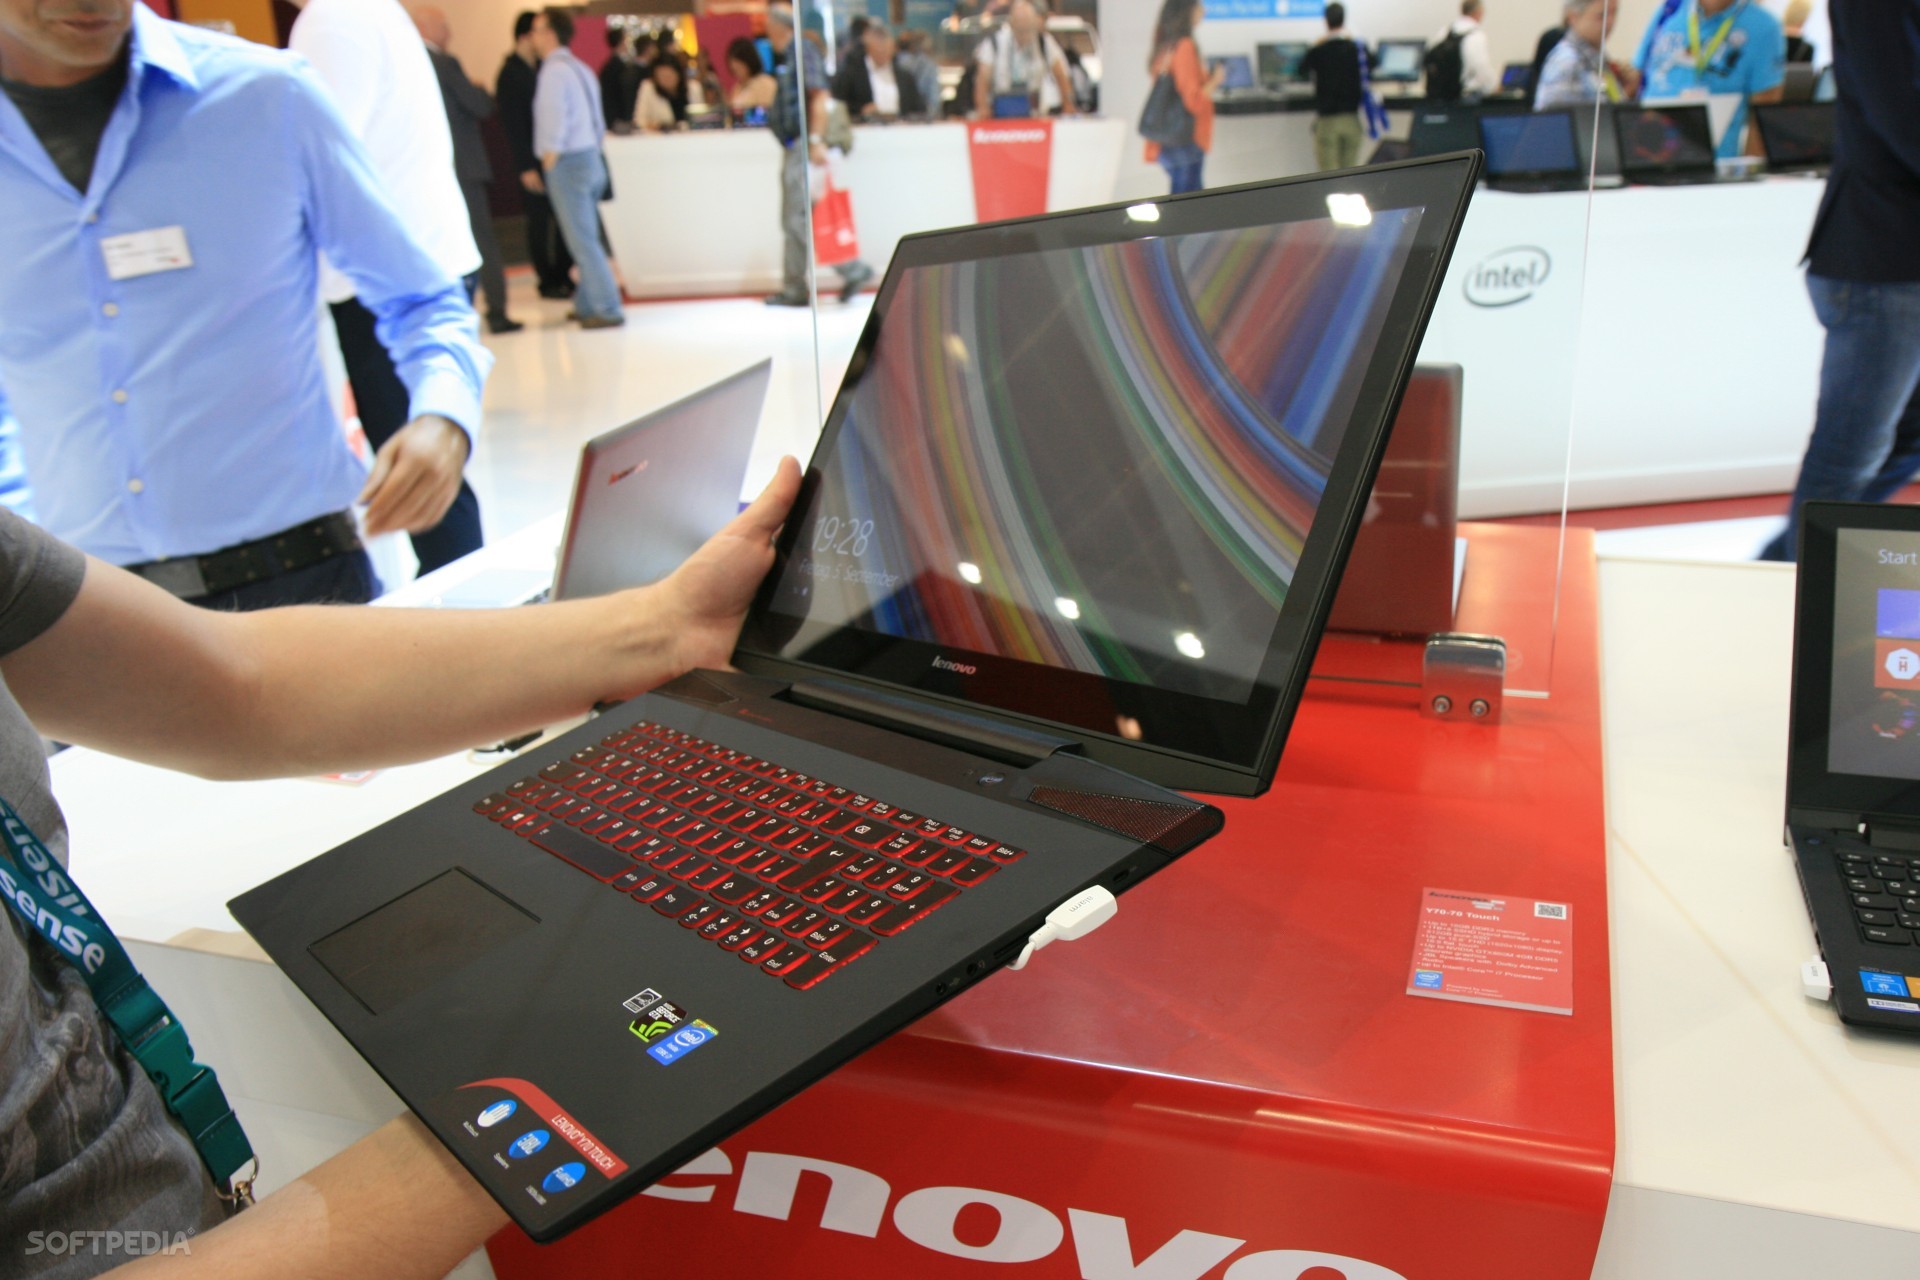 Hands-On: Lenovo IdeaPad Y70 Gaming Laptop with Touch Screen